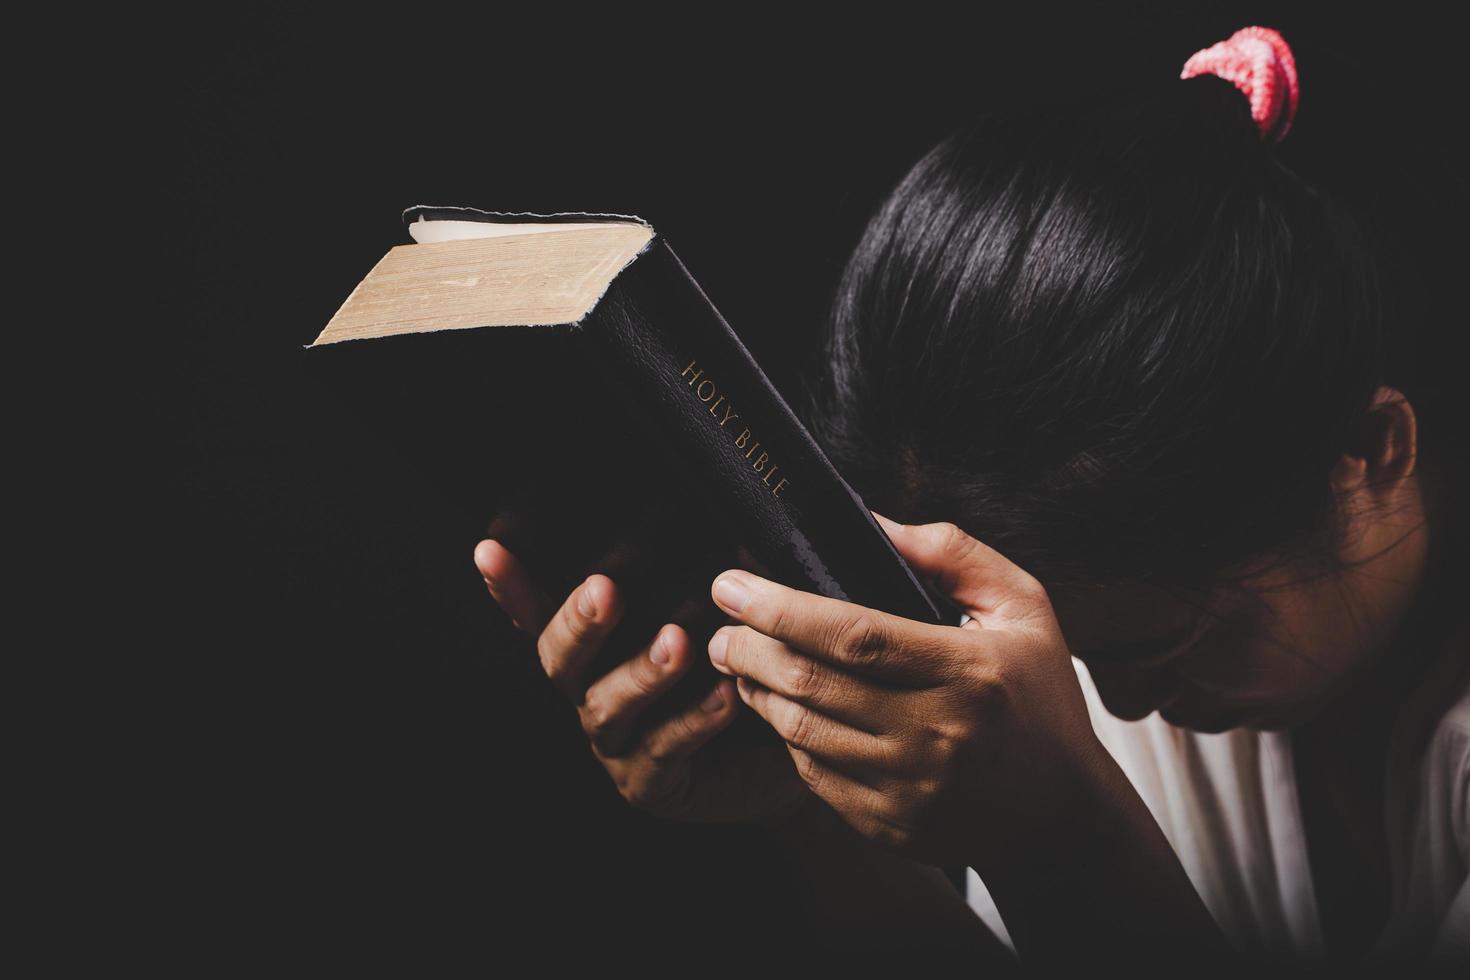 christian woman hand on holy bible are pray and worship for thank god in church with black background, concept for faith, spirituality and religion photo